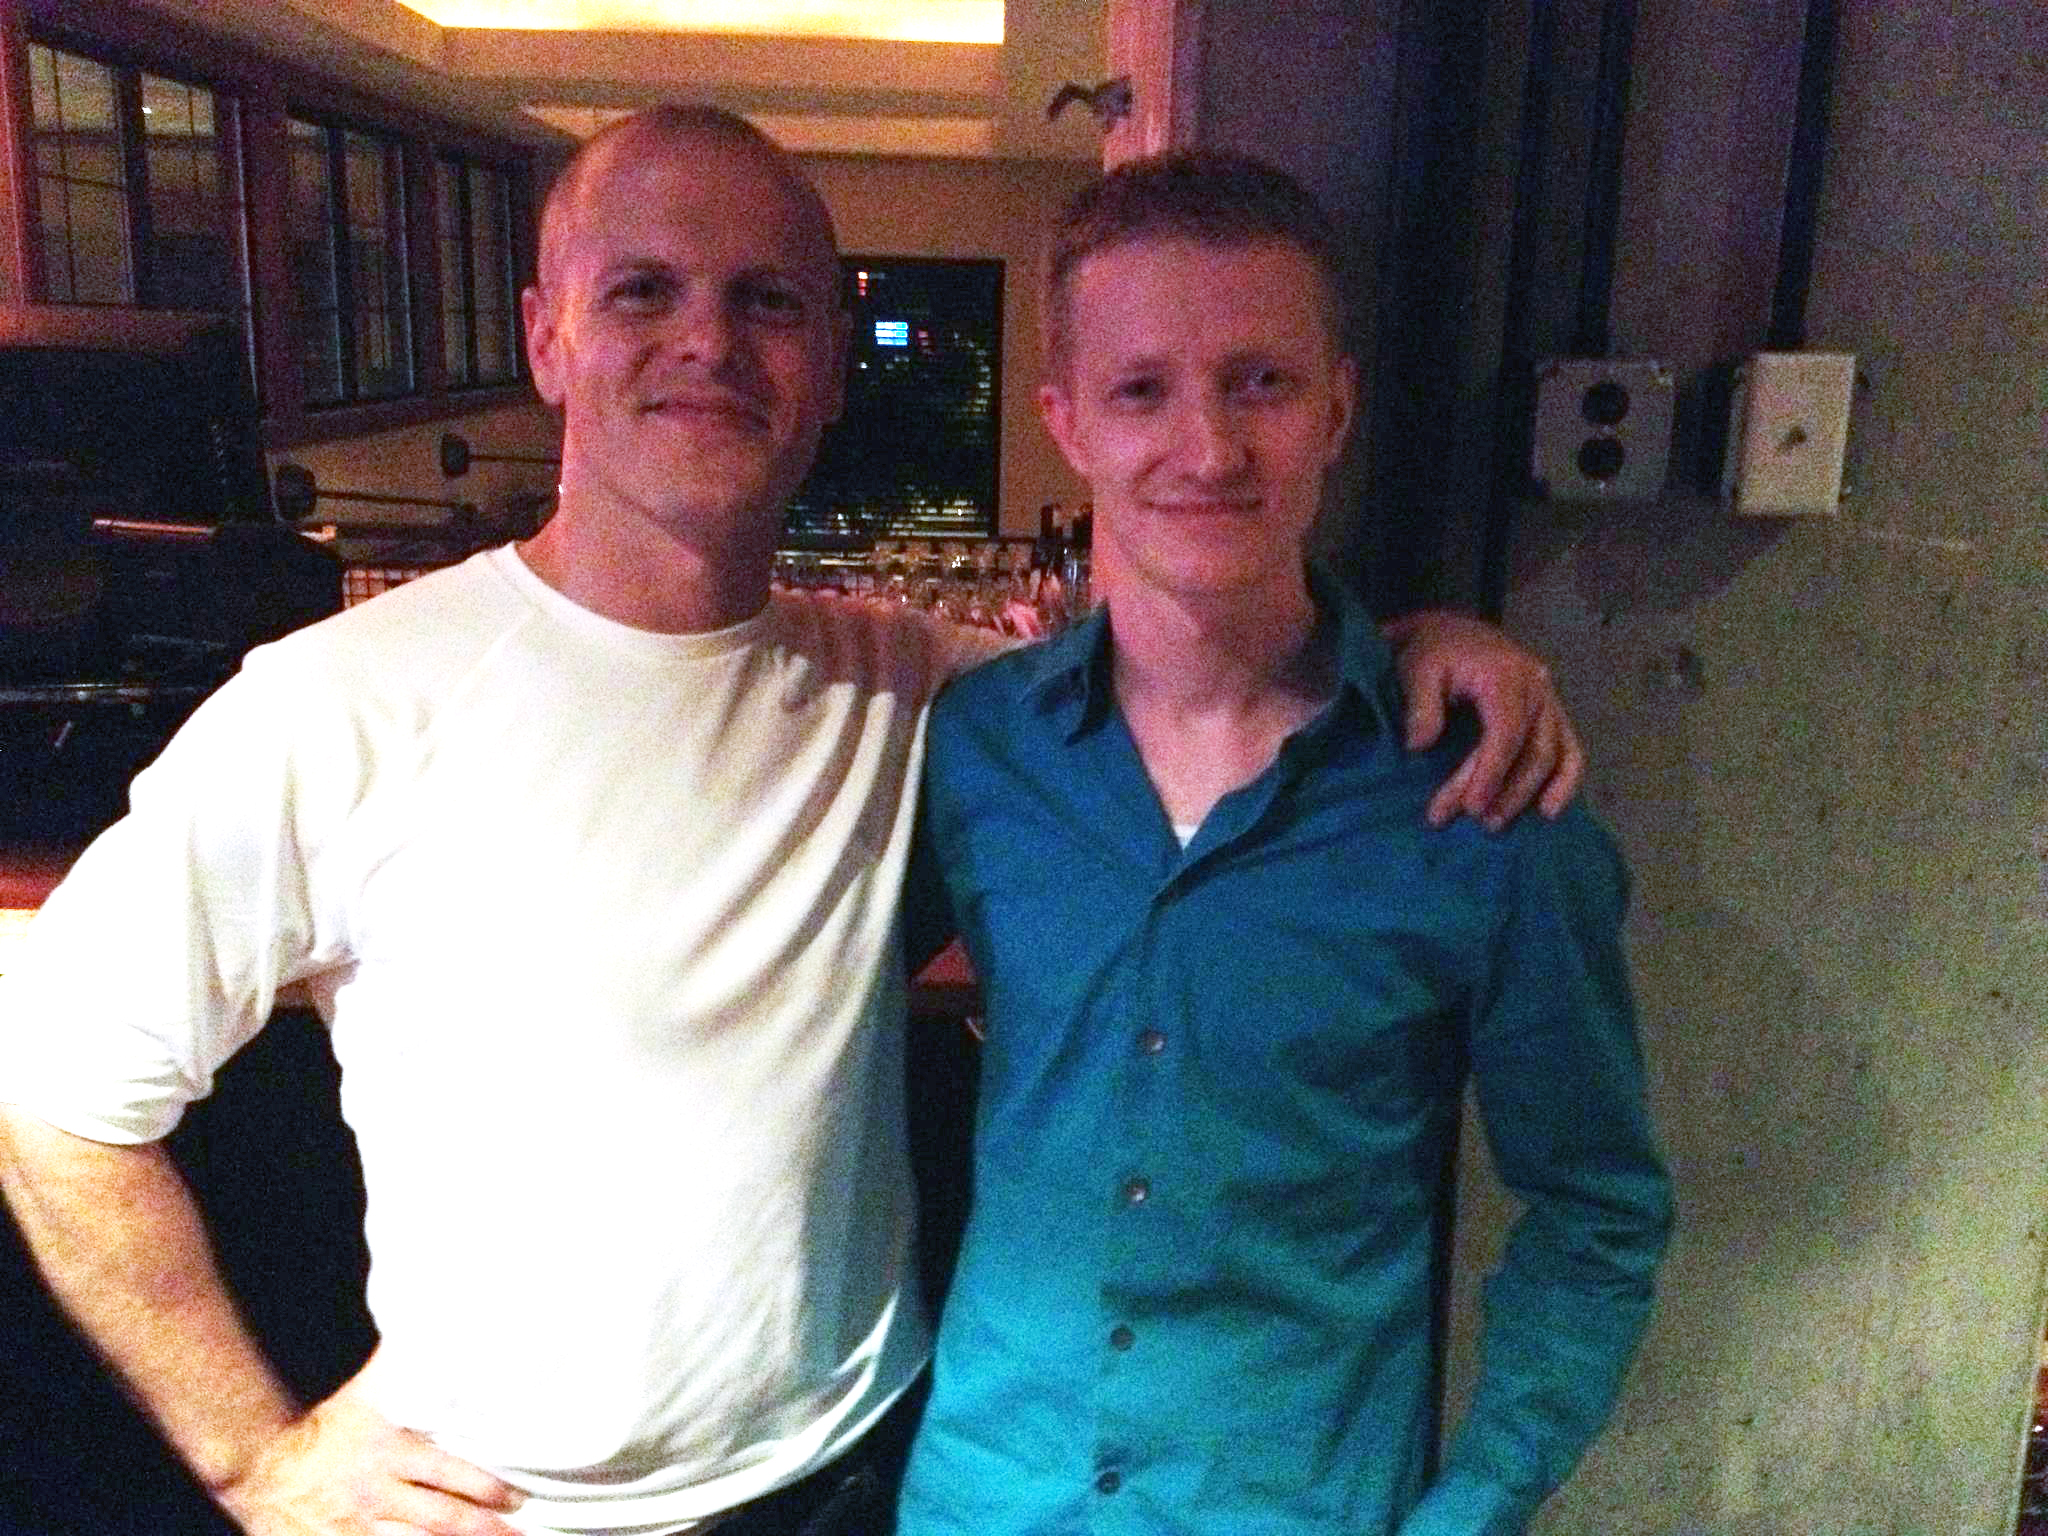 With Tim Ferriss